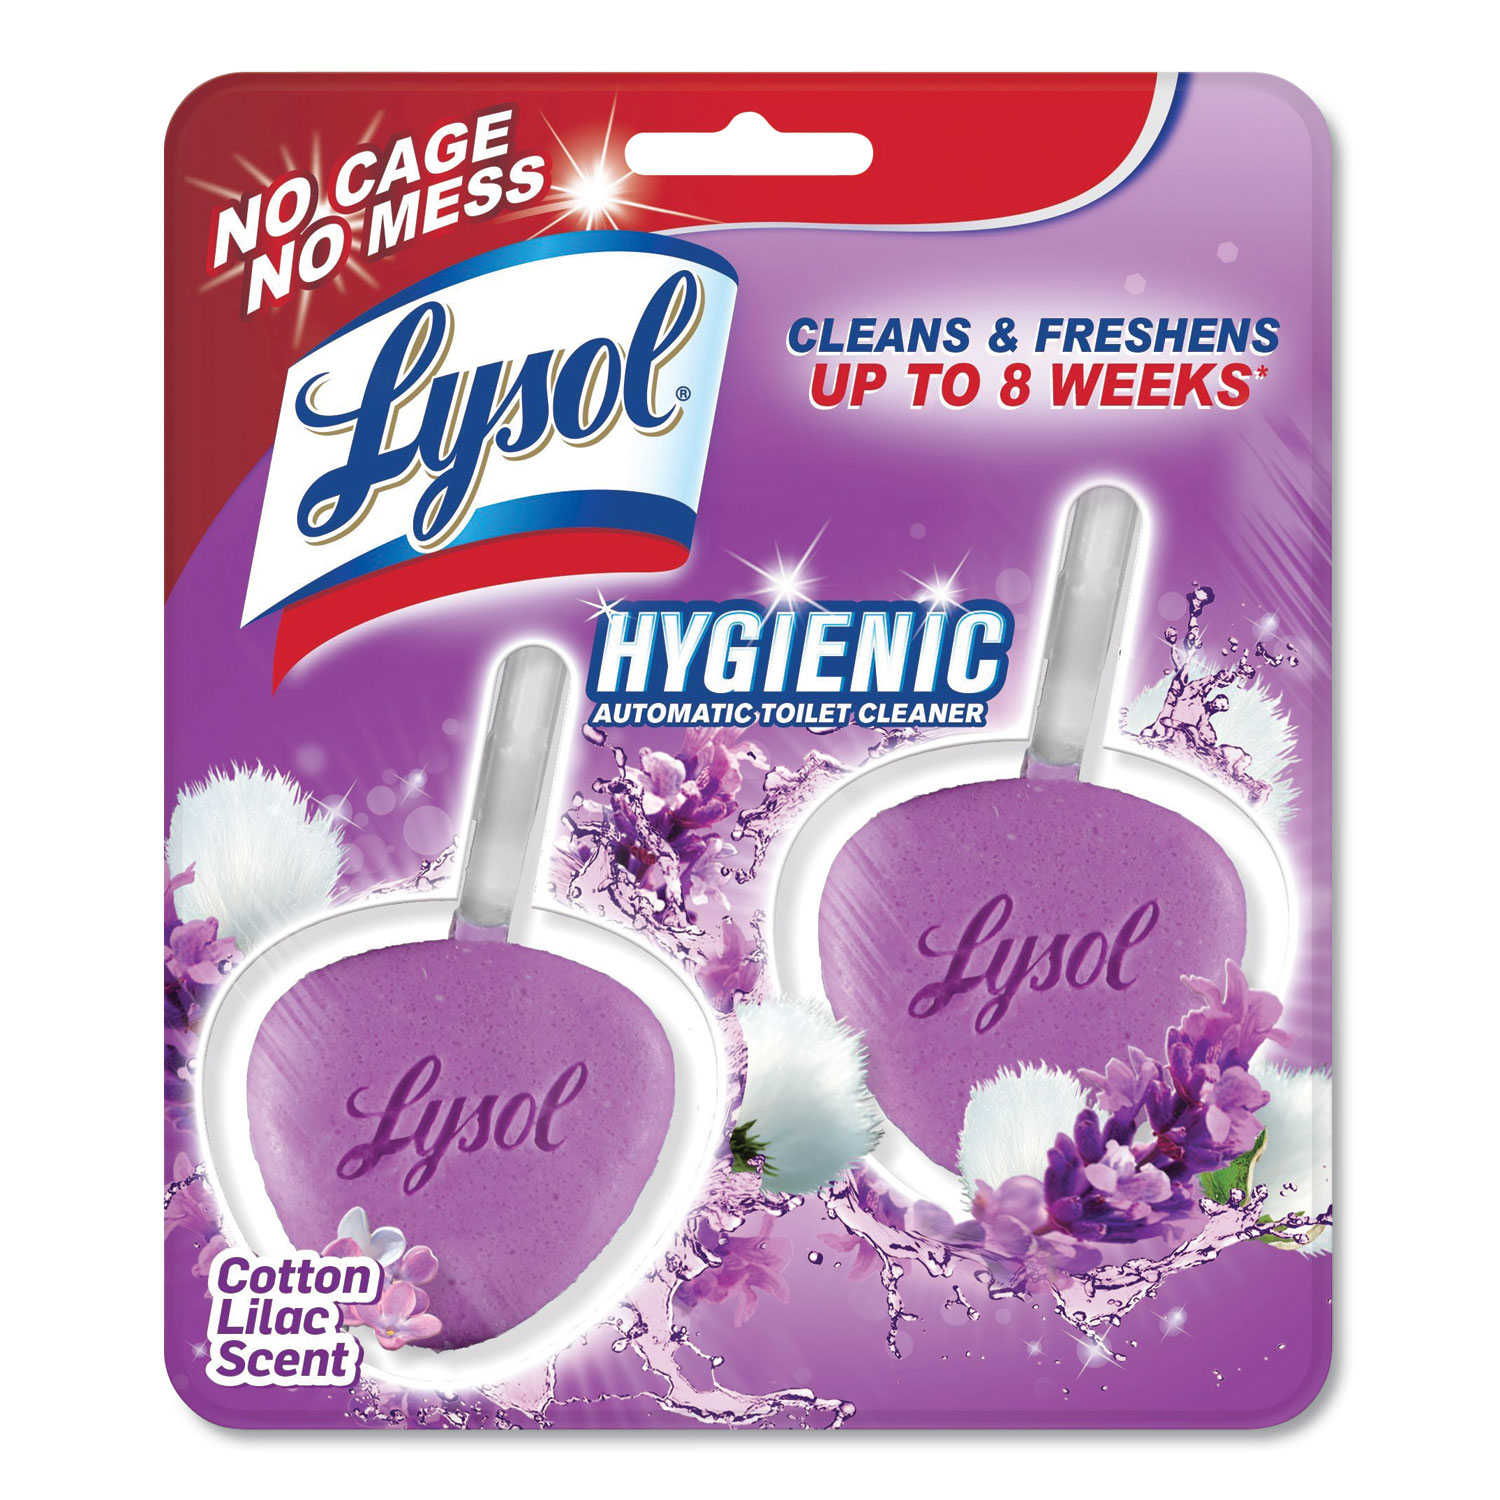  LYSOL Brand 19200-83722 Hygienic Automatic Toilet Bowl Cleaner, Cotton Lilac, 2/Pack (RAC83722) 